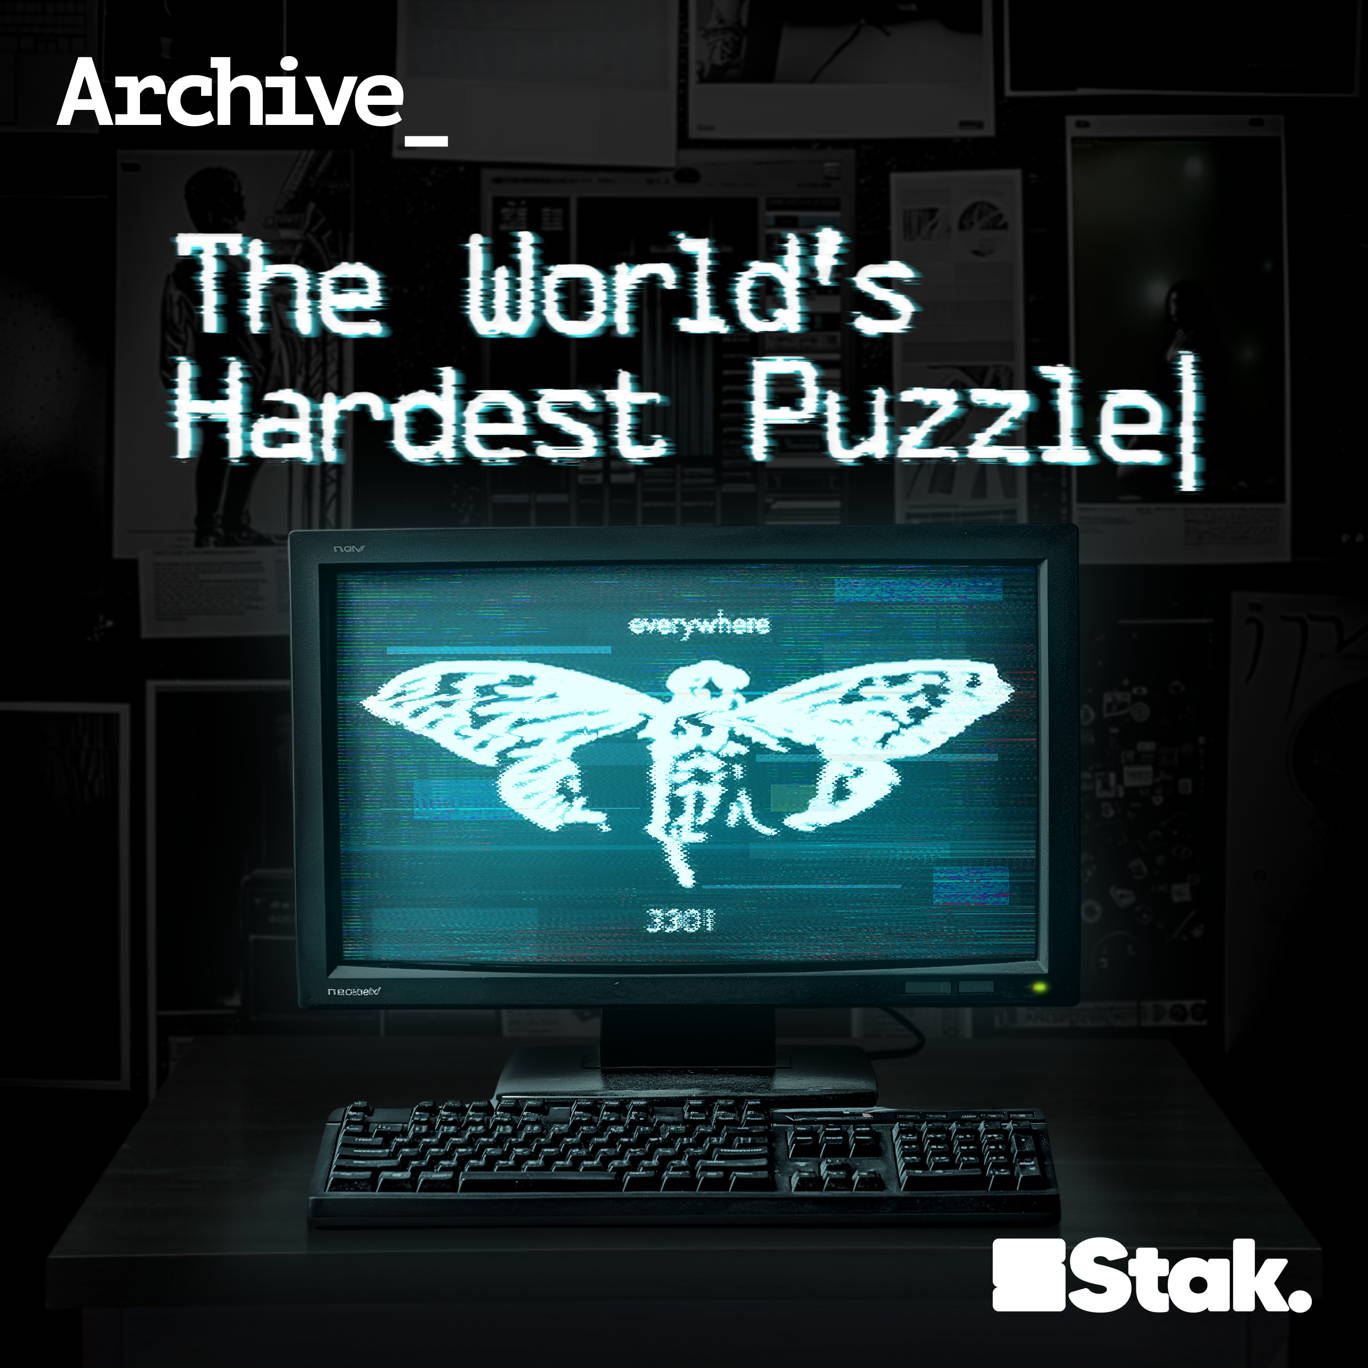 The artwork for the Archive: The World's Hardest Puzzle podcast.